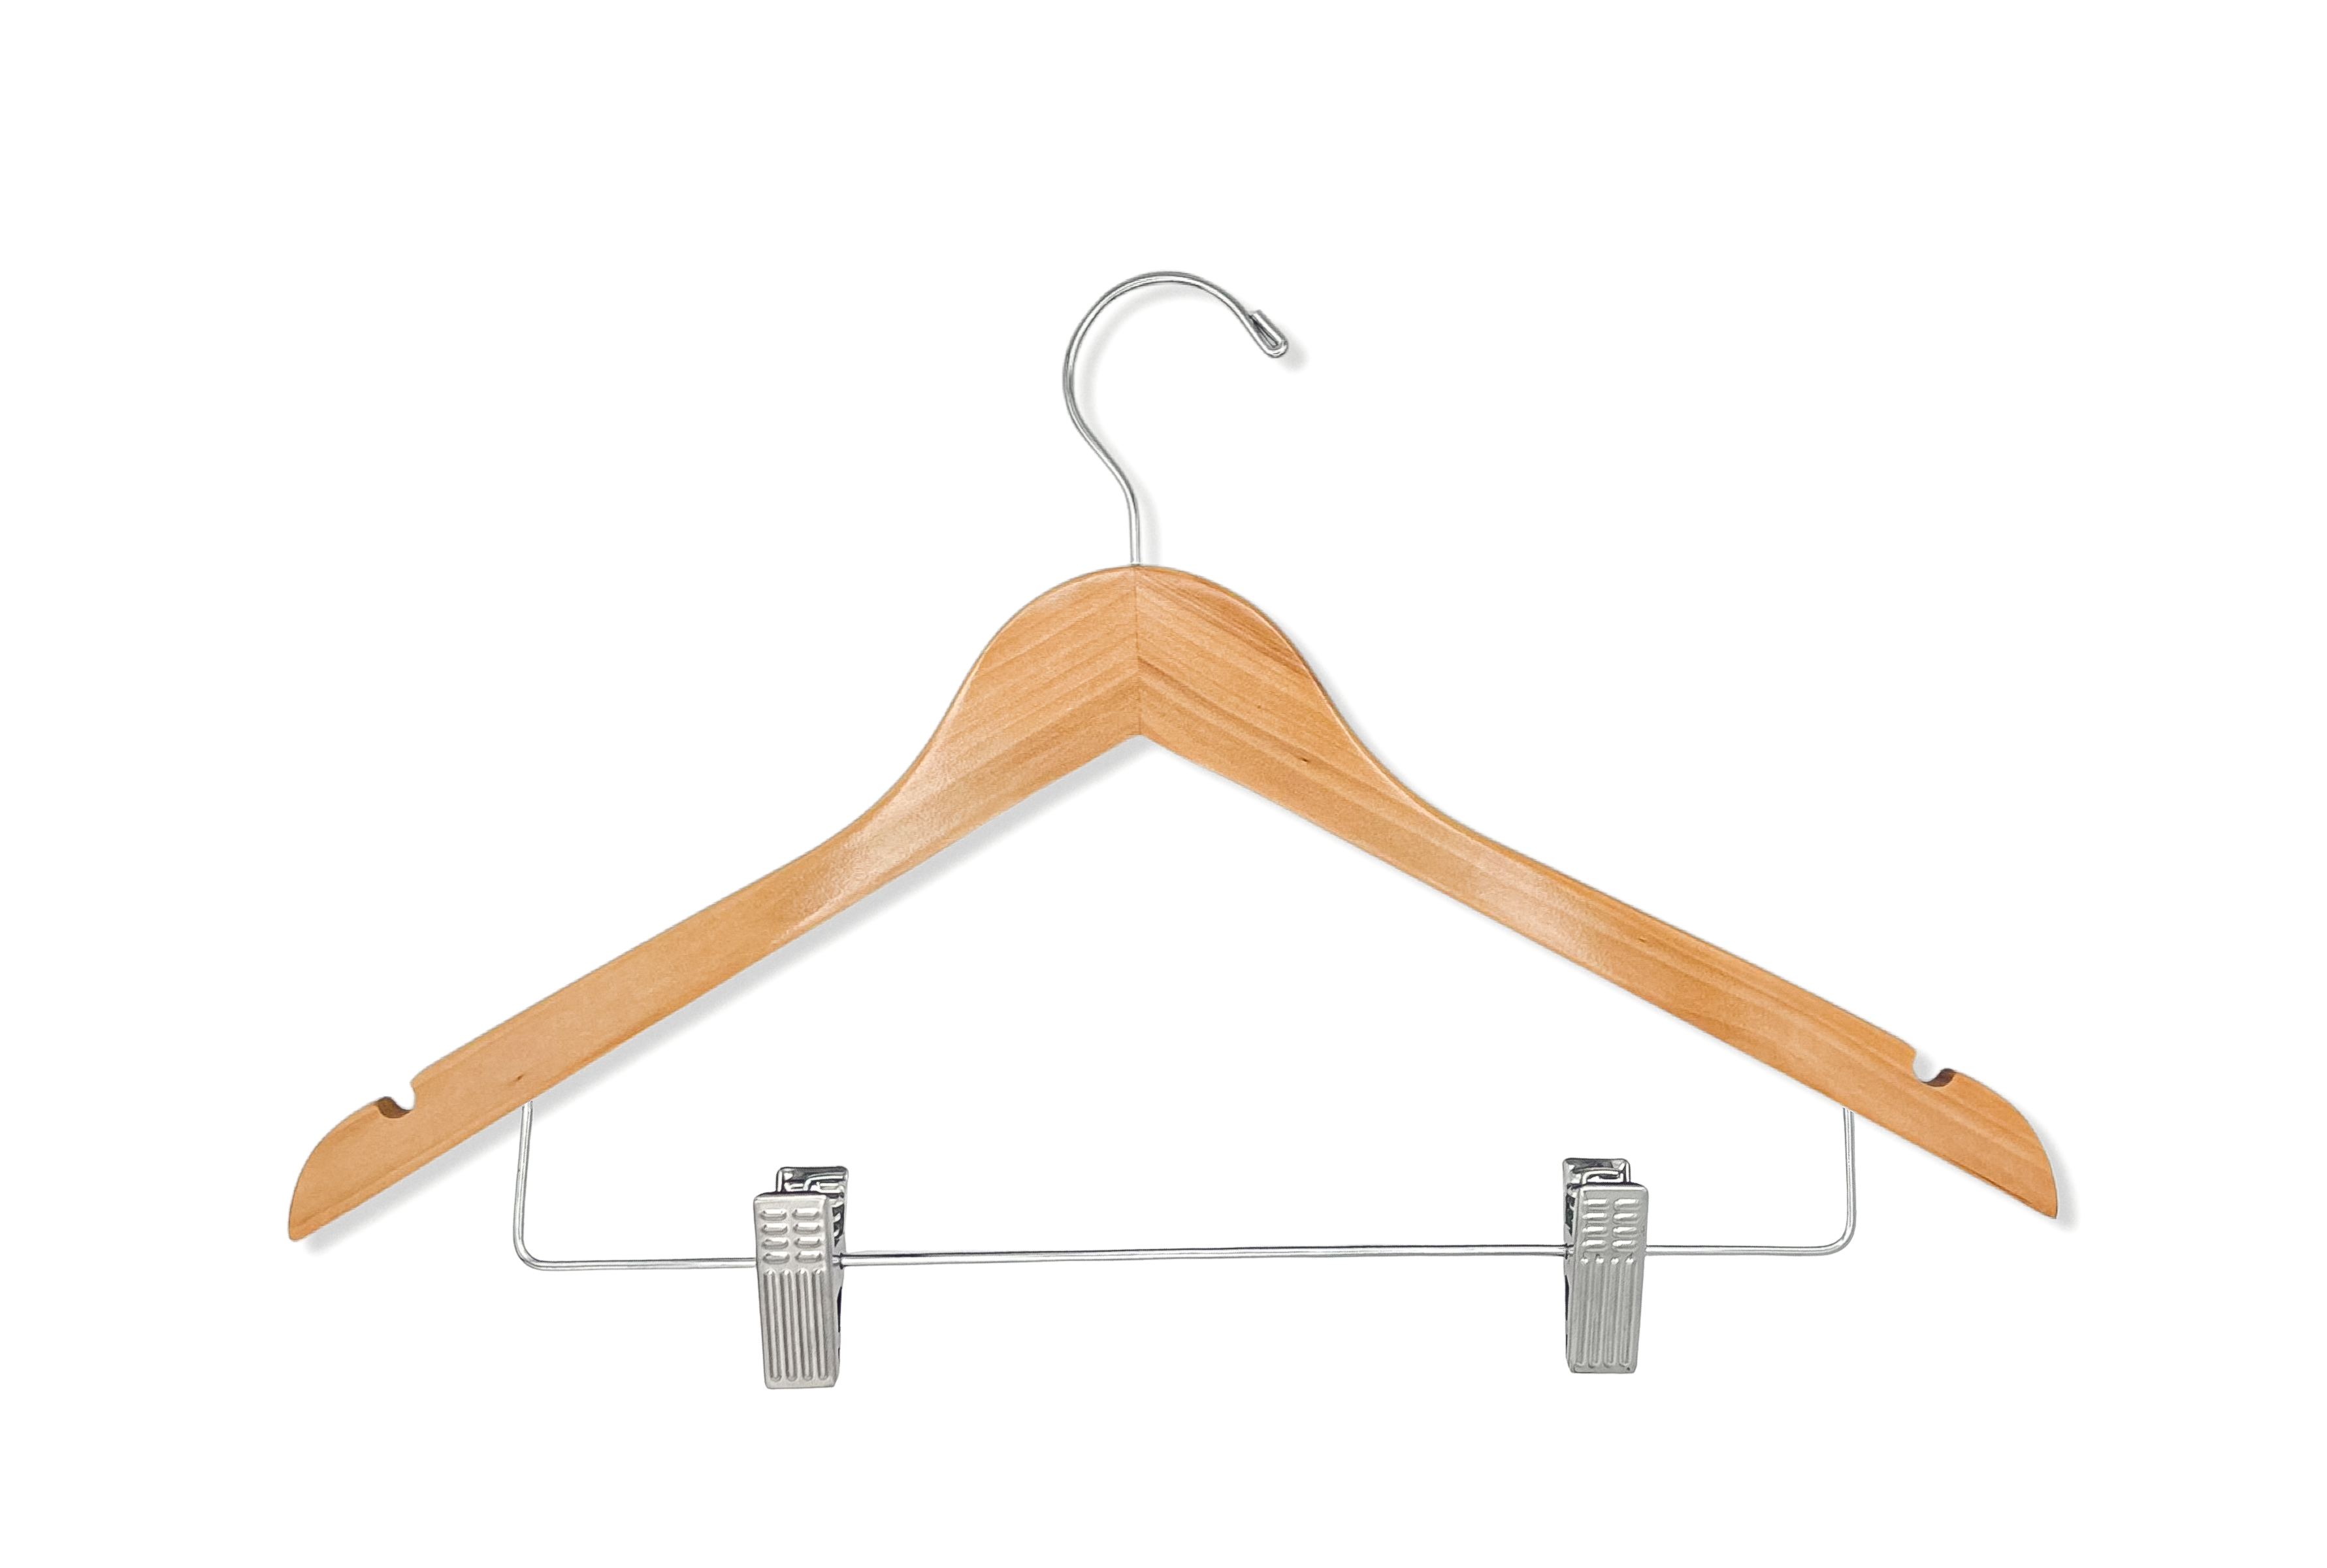 Natural Maple Wood Combination Hanger with adjustable cushion clips to hang both your top and bottom clothing